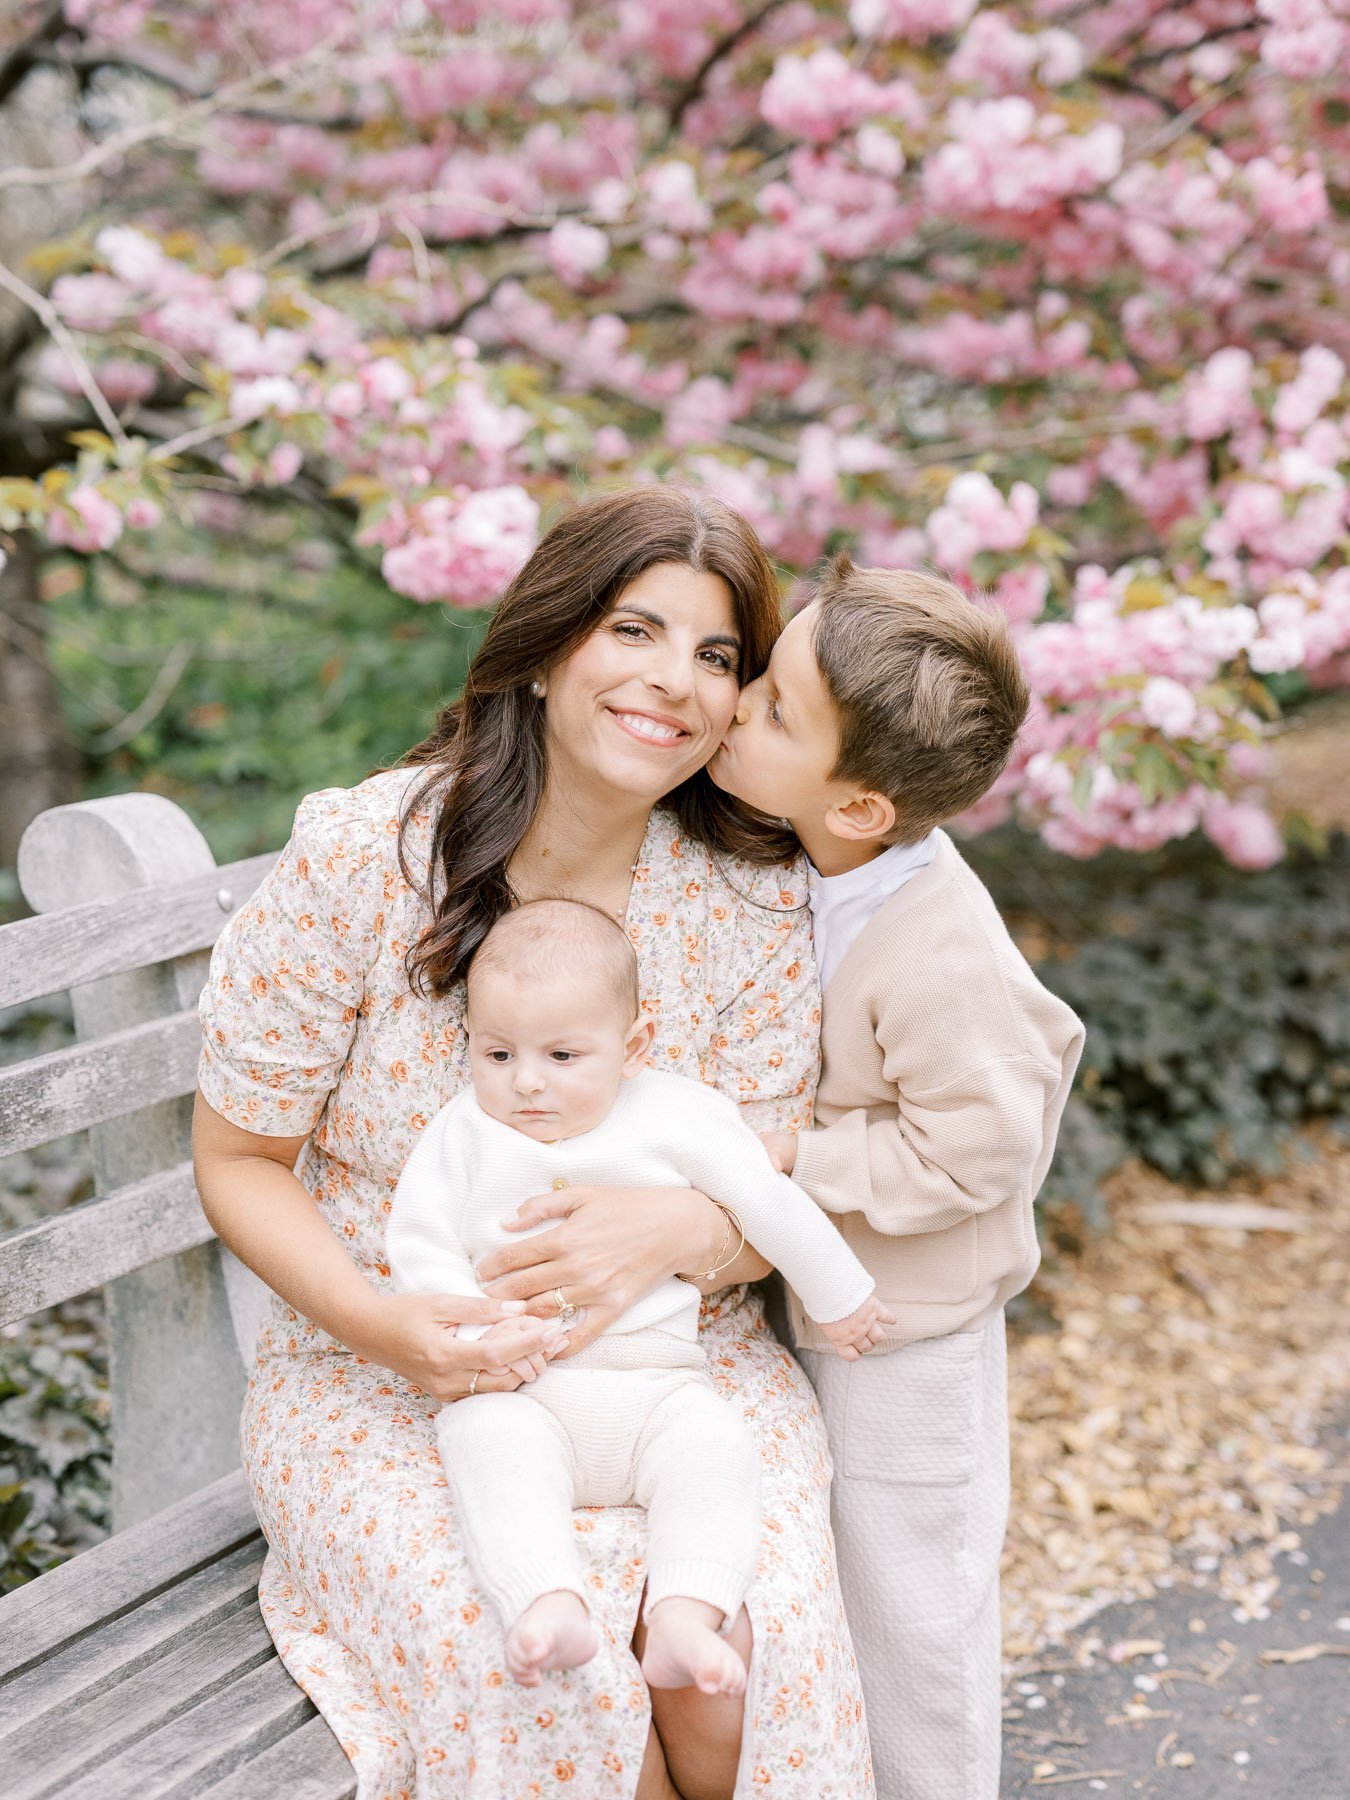 NYC Blossom family portraits by Michelle Lange Photography-18.jpg